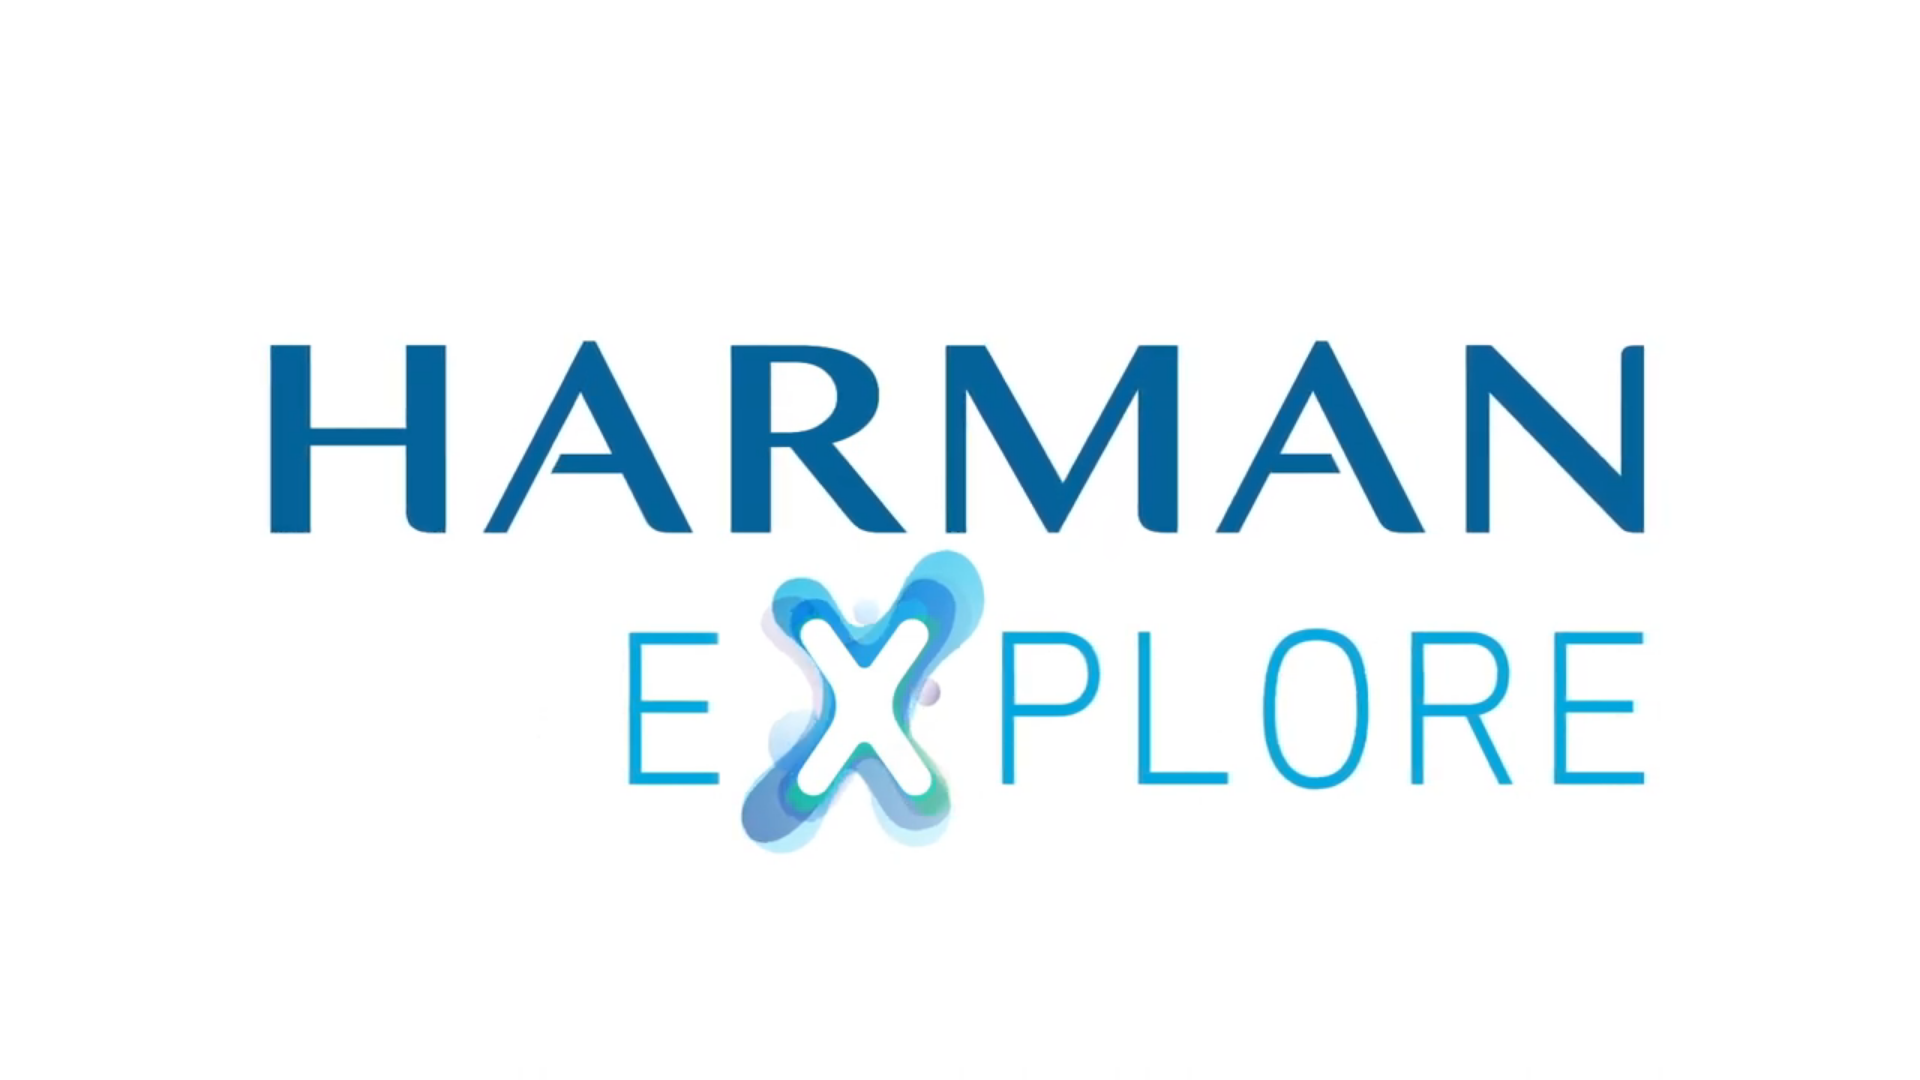 HARMAN EXPLORE 2022 in less than 2 minutes